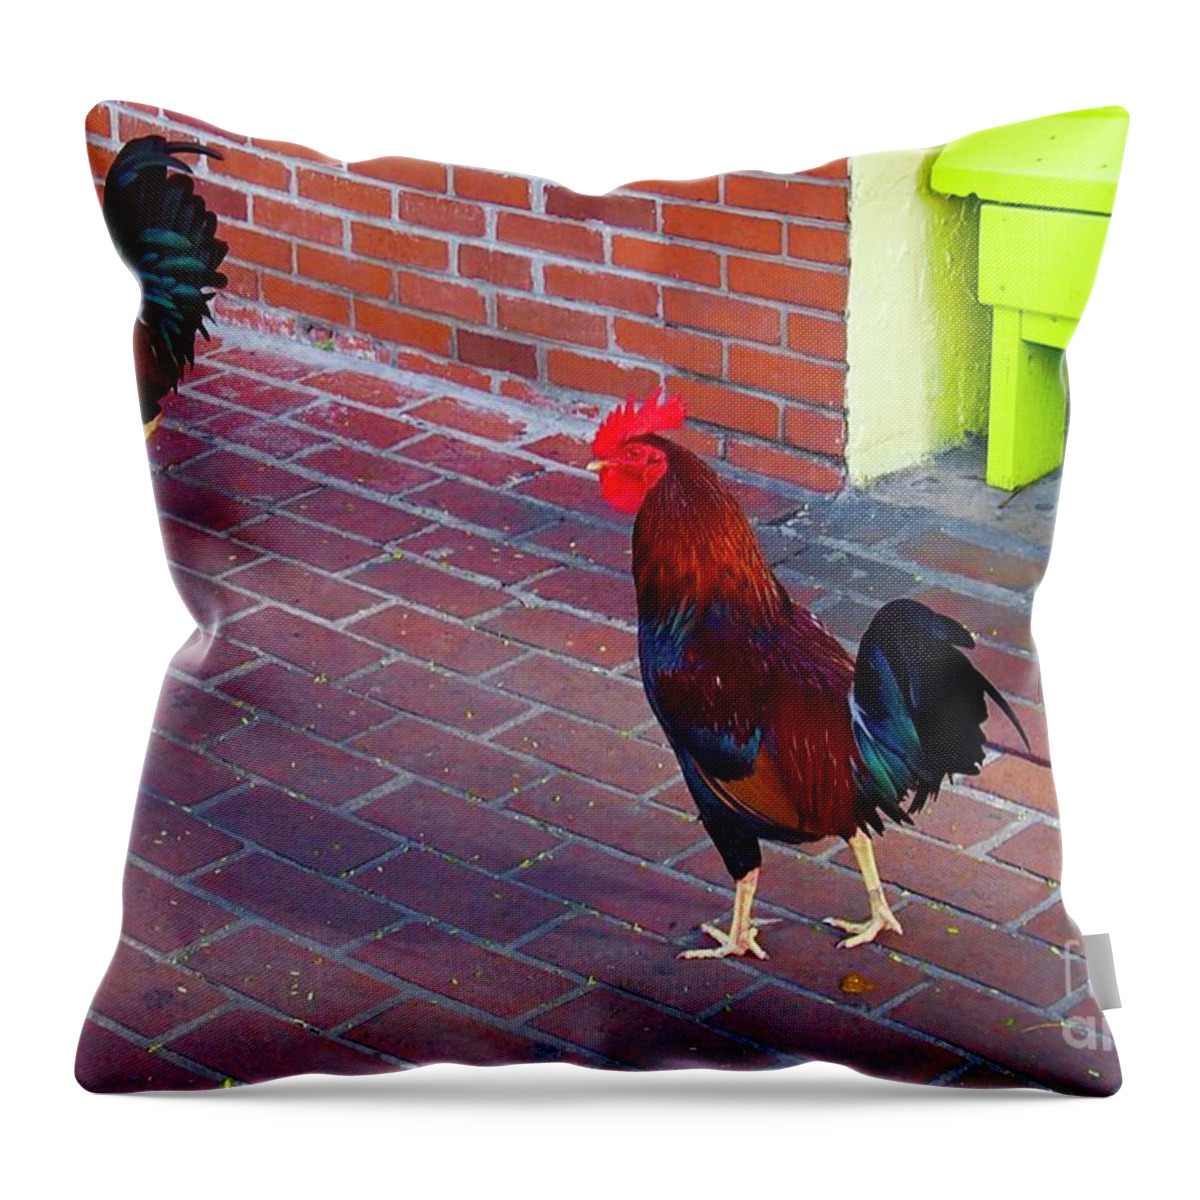 Roster Throw Pillow featuring the photograph Brother Rosters by Joseph Mora